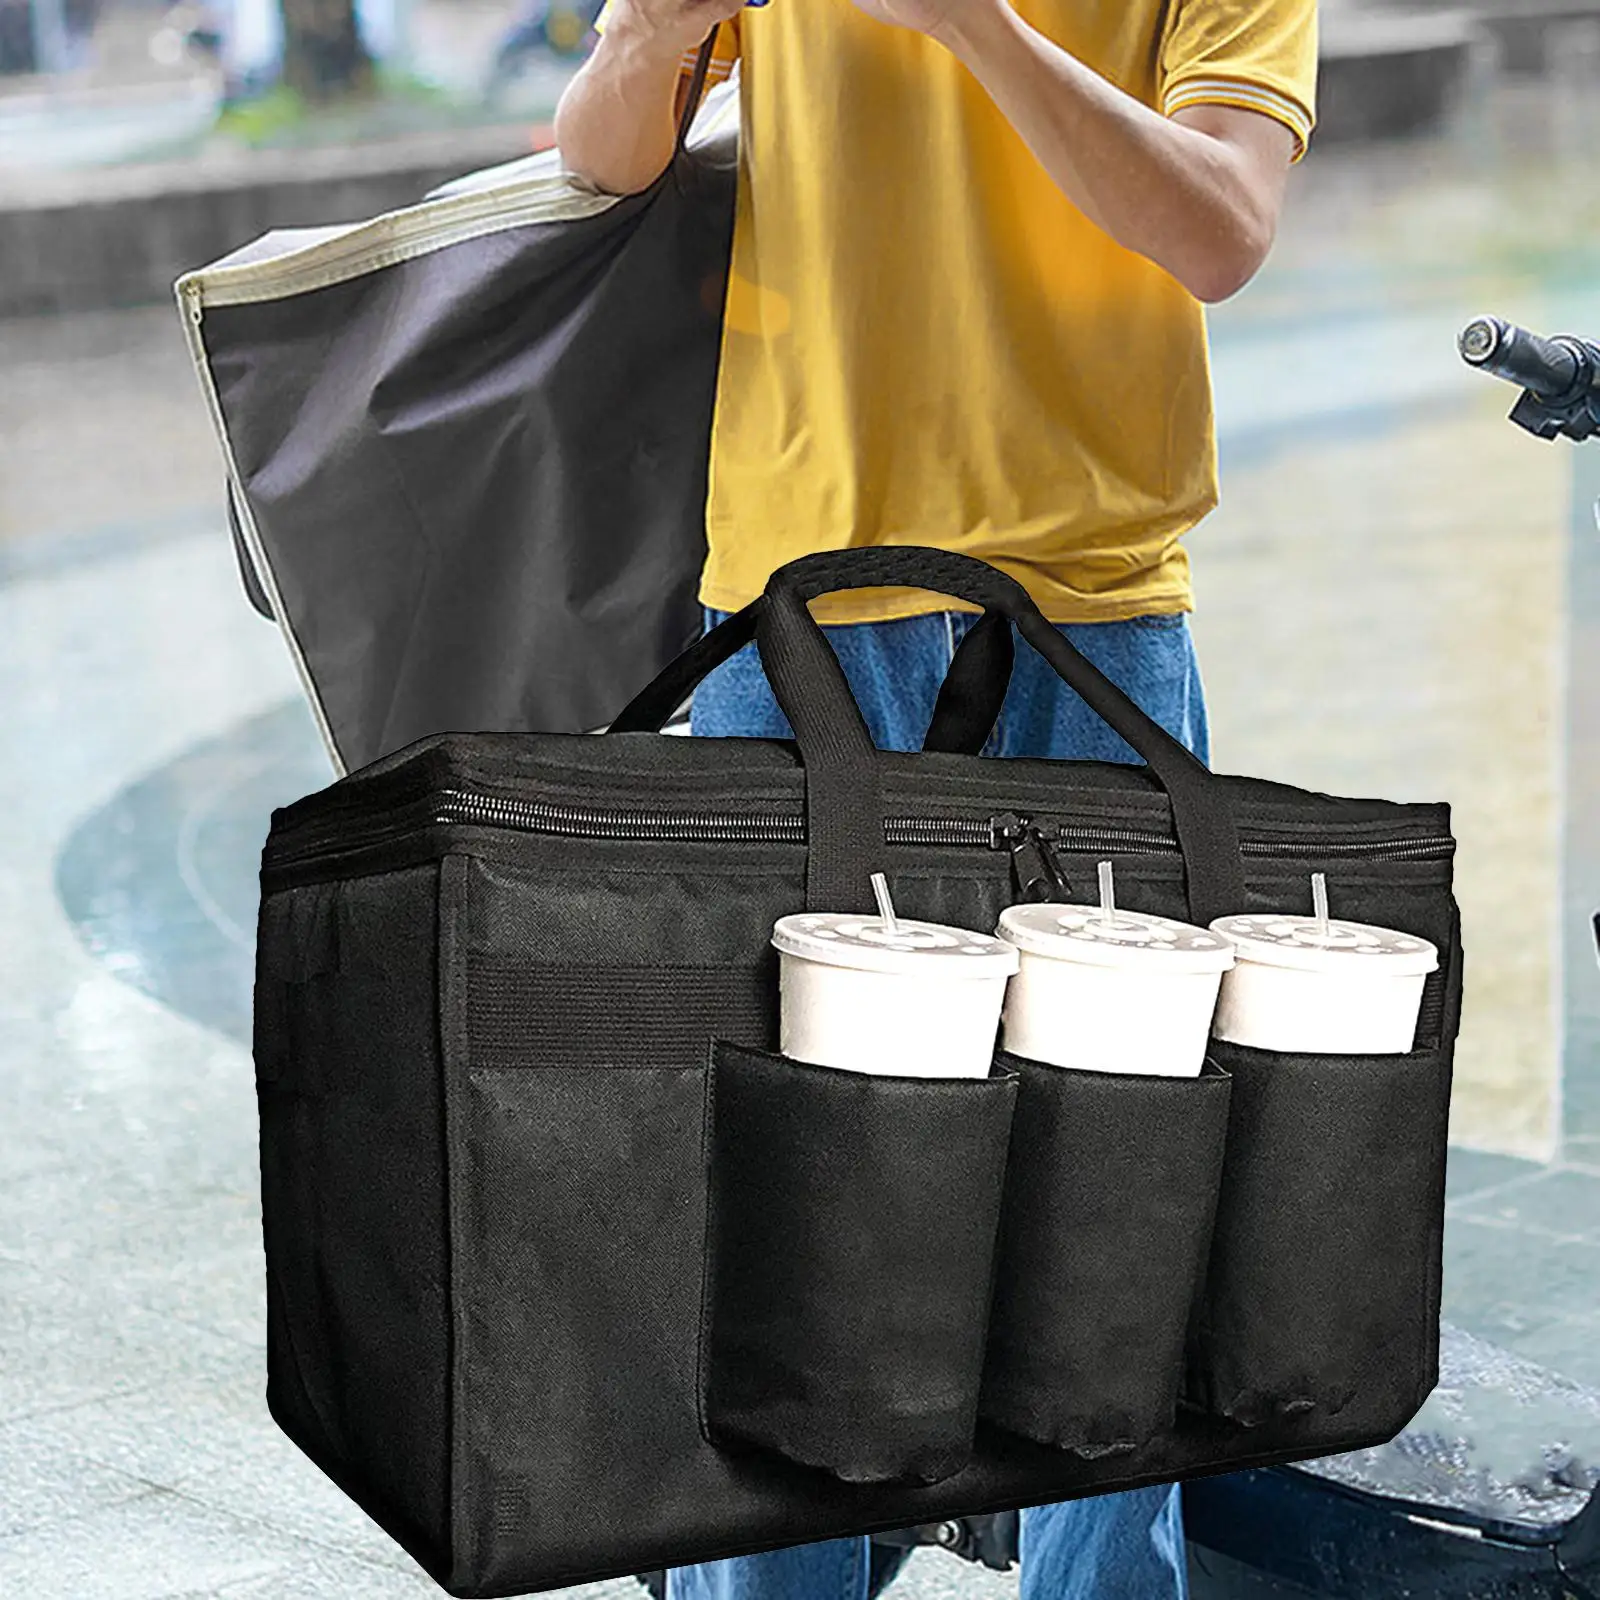 Insulated Food Delivery Bag, Grocery Bag, Thermal Cup Holder, Insulated Picnic Bag, Restaurant Personal Travel